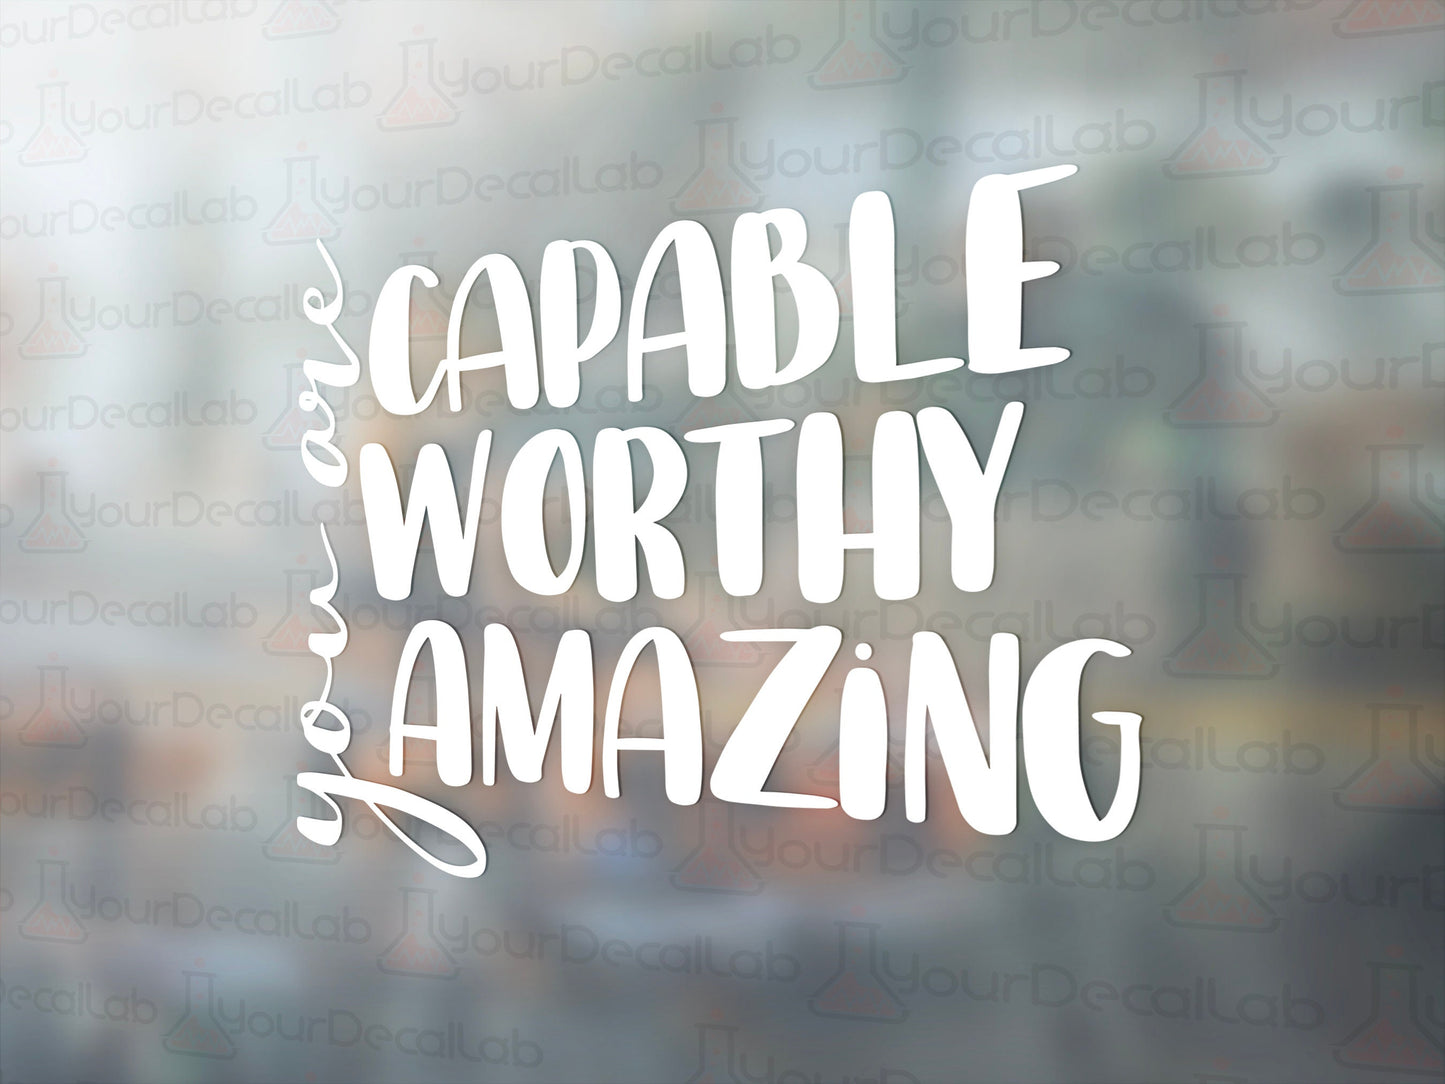 Capable, Worthy, Amazing Decal - Many Colors & Sizes